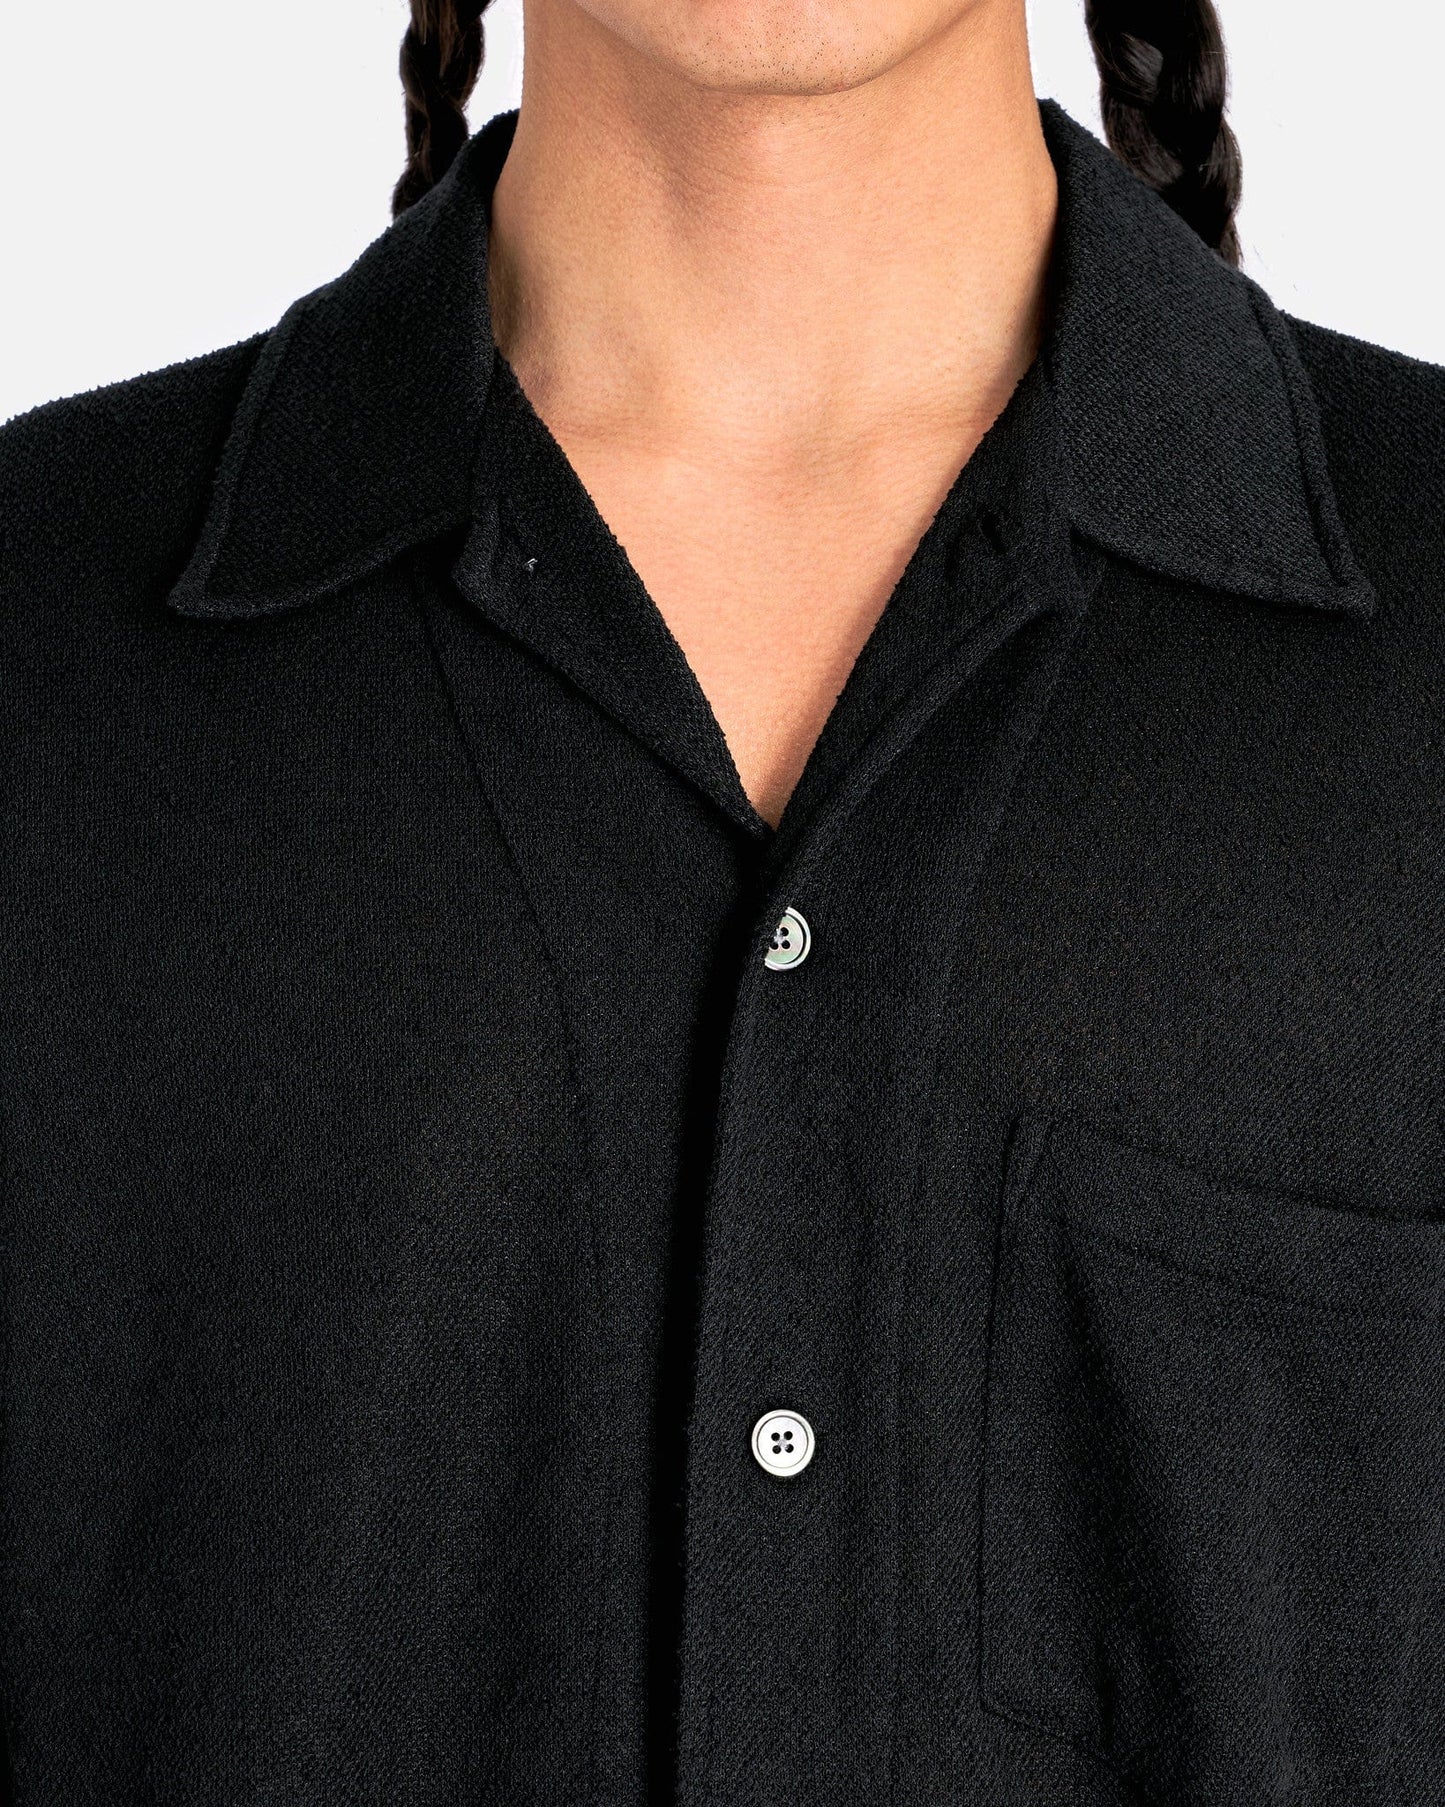 Our Legacy Men's Tops Box Shirt Shortsleeve in Black Boucle